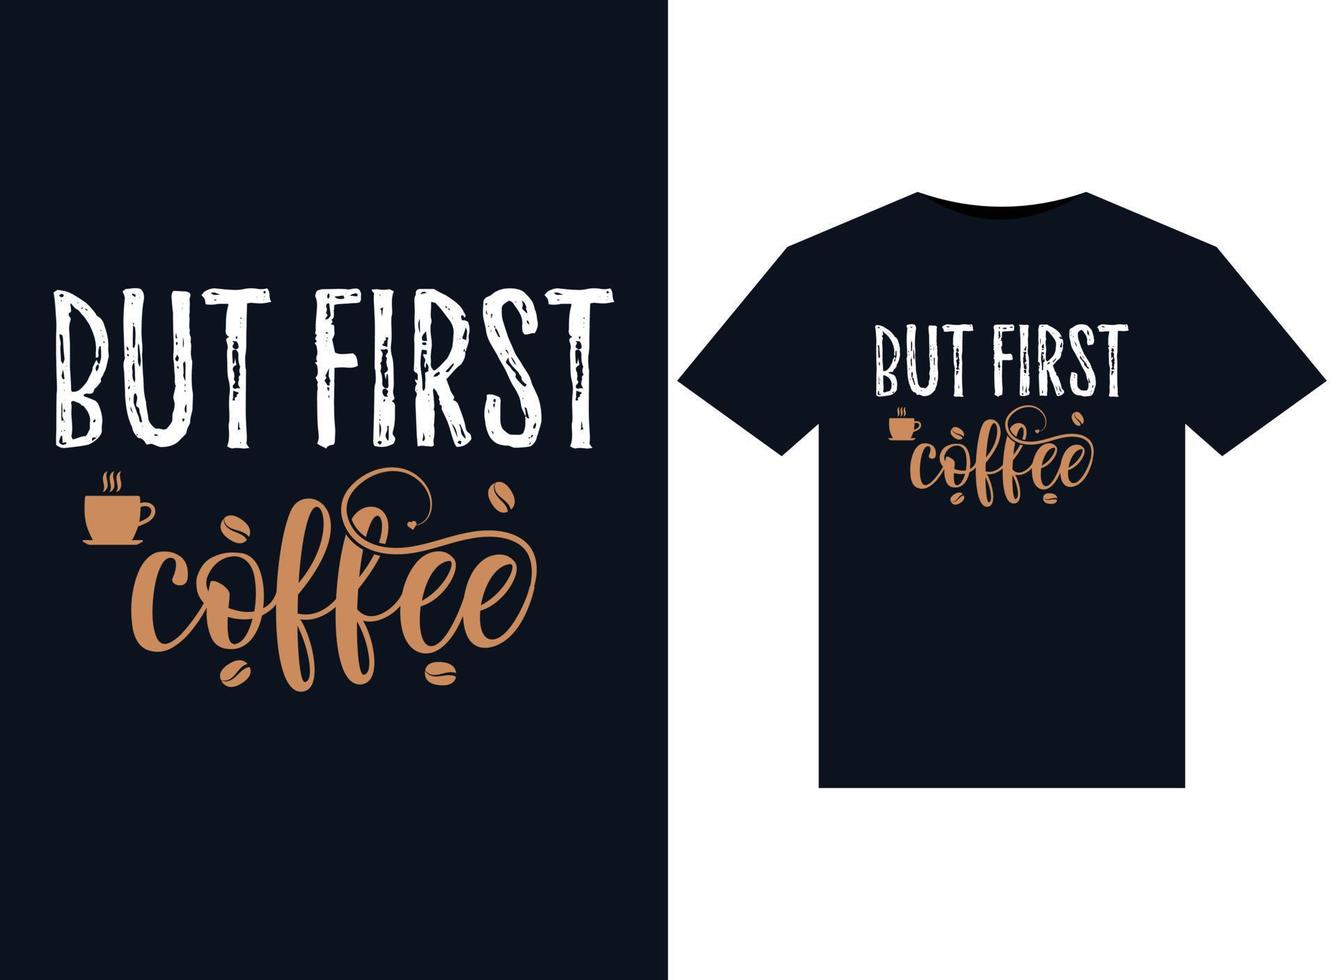 But first coffee illustrations for print-ready T-Shirts design vector